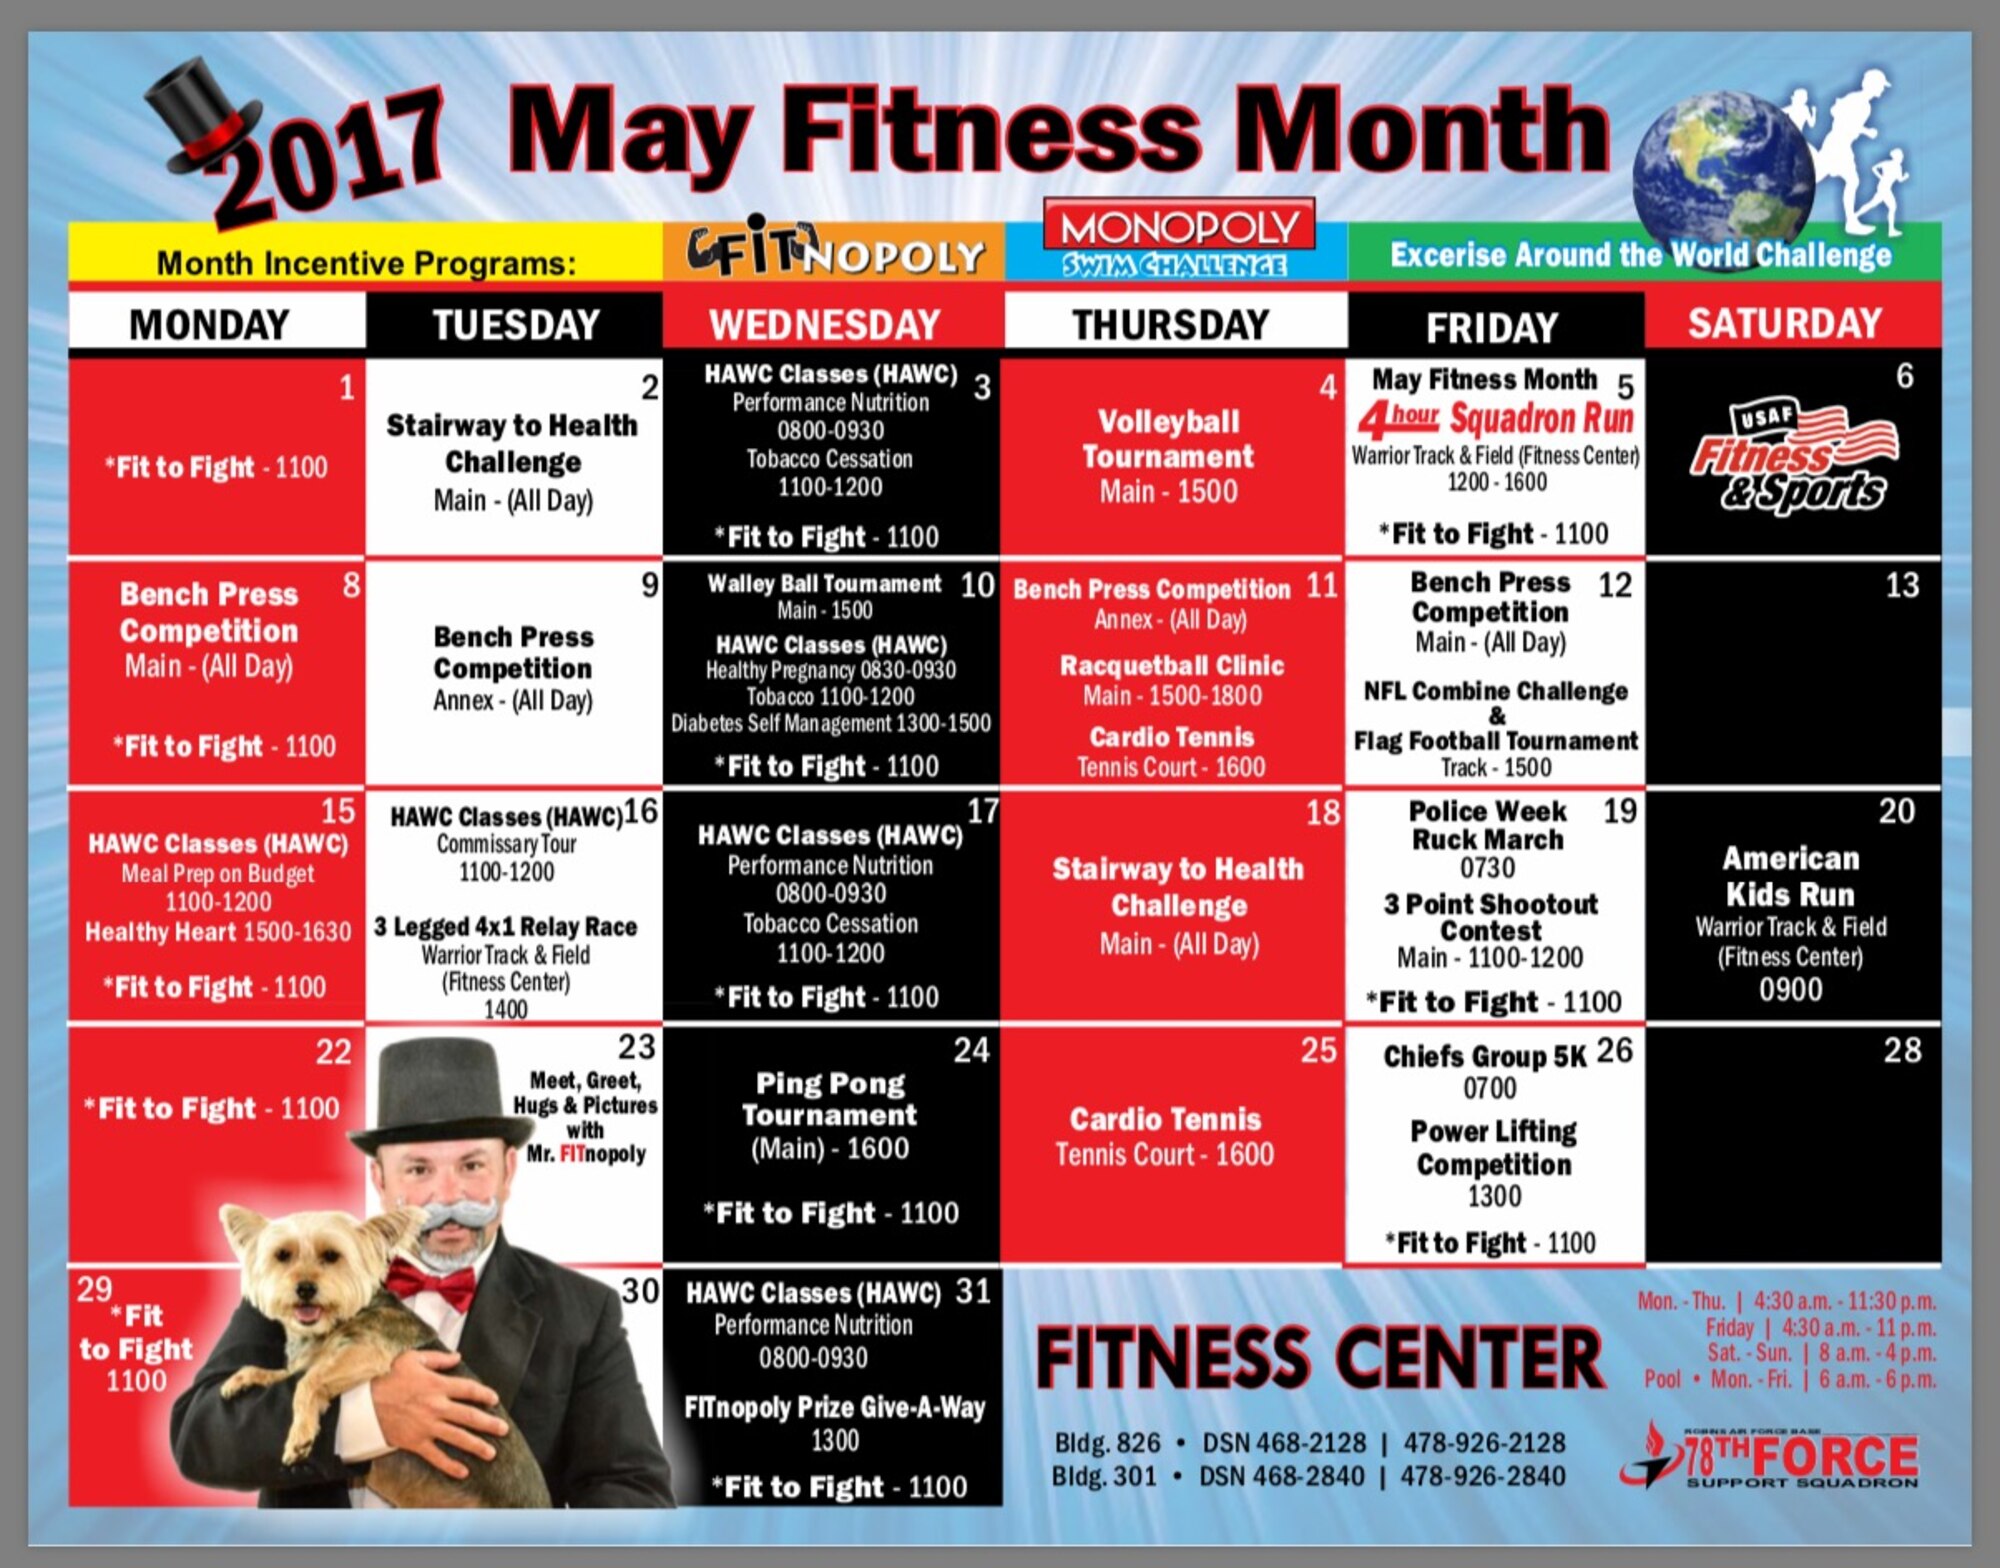 May is fitness month, and Team Robins has an opportunity to participate by playing “FITnopoly,” a game similar to the classic Monopoly, where patrons earn tickets for completing certain fitness challenges in hopes of earning big and small prizes. (U.S. Air Force graphic by Kenya James)